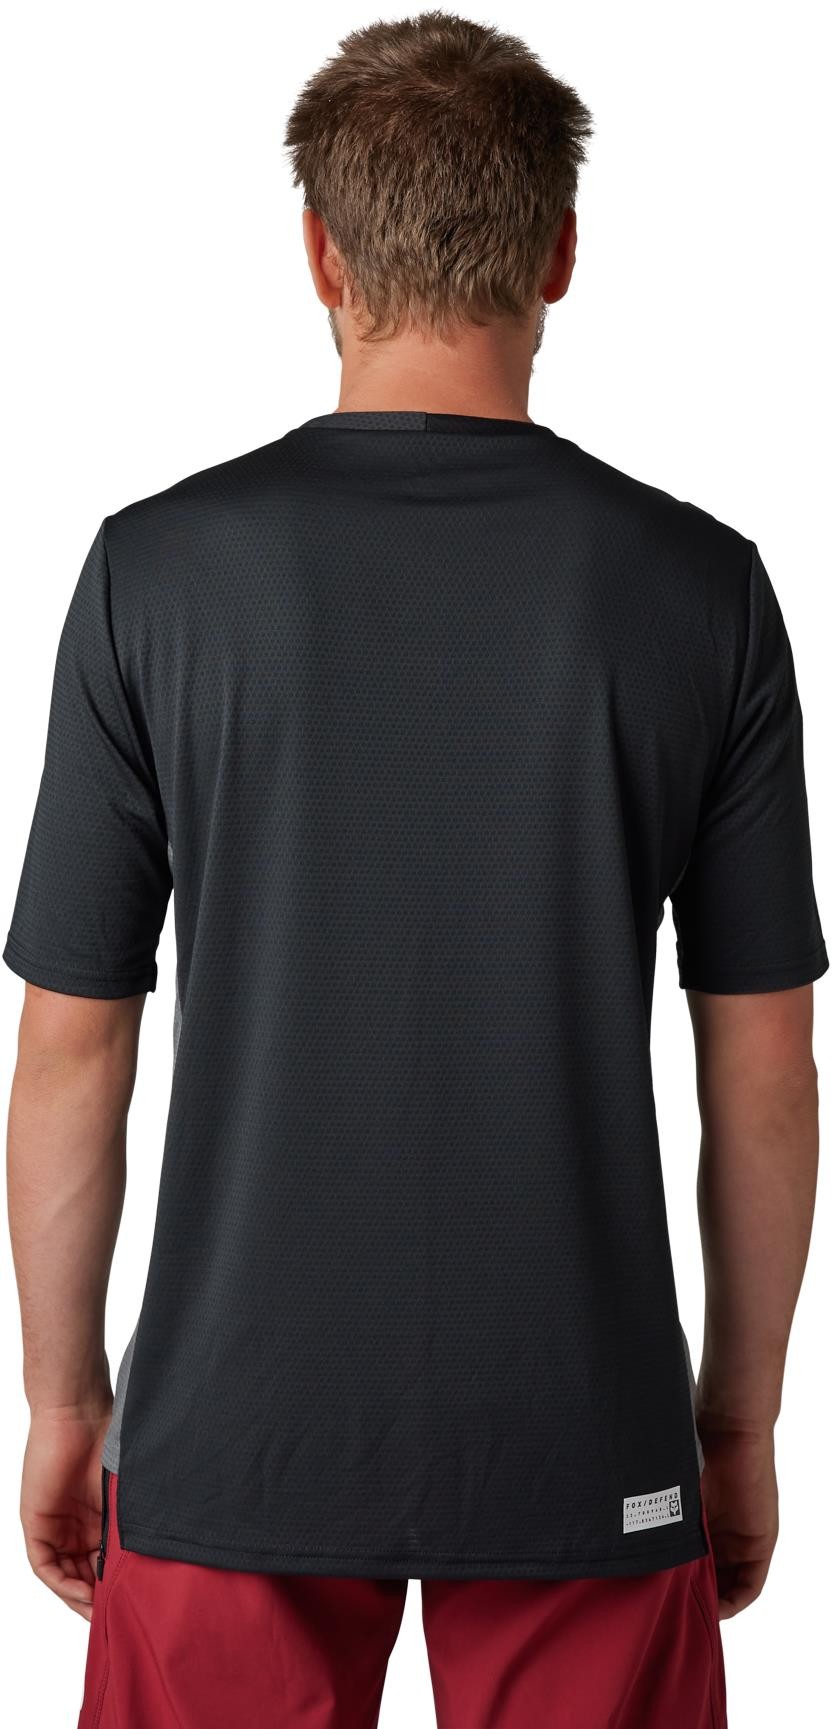 Defend Short Sleeve Cycling Jersey image 2